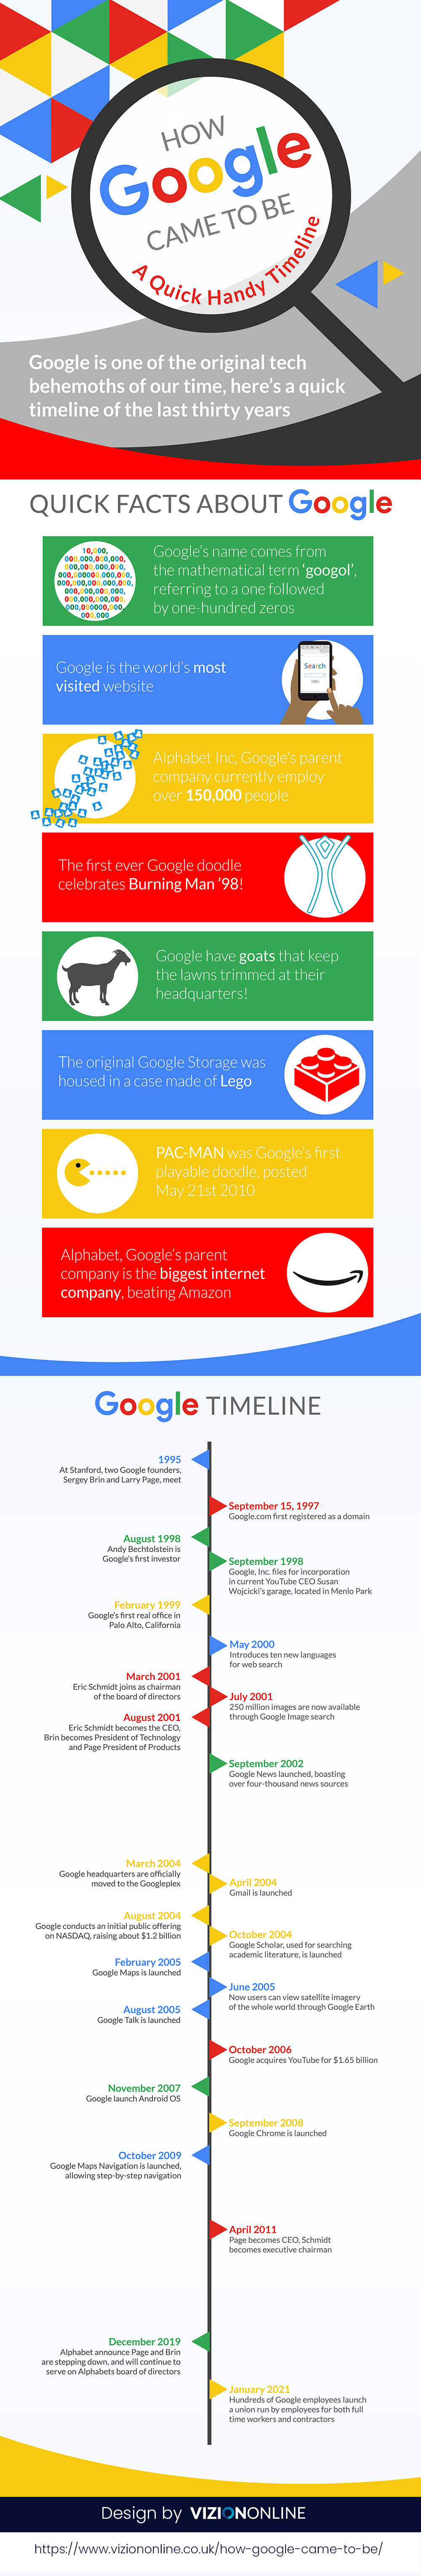 How Google Came To Be - A Quick Handy Timeline